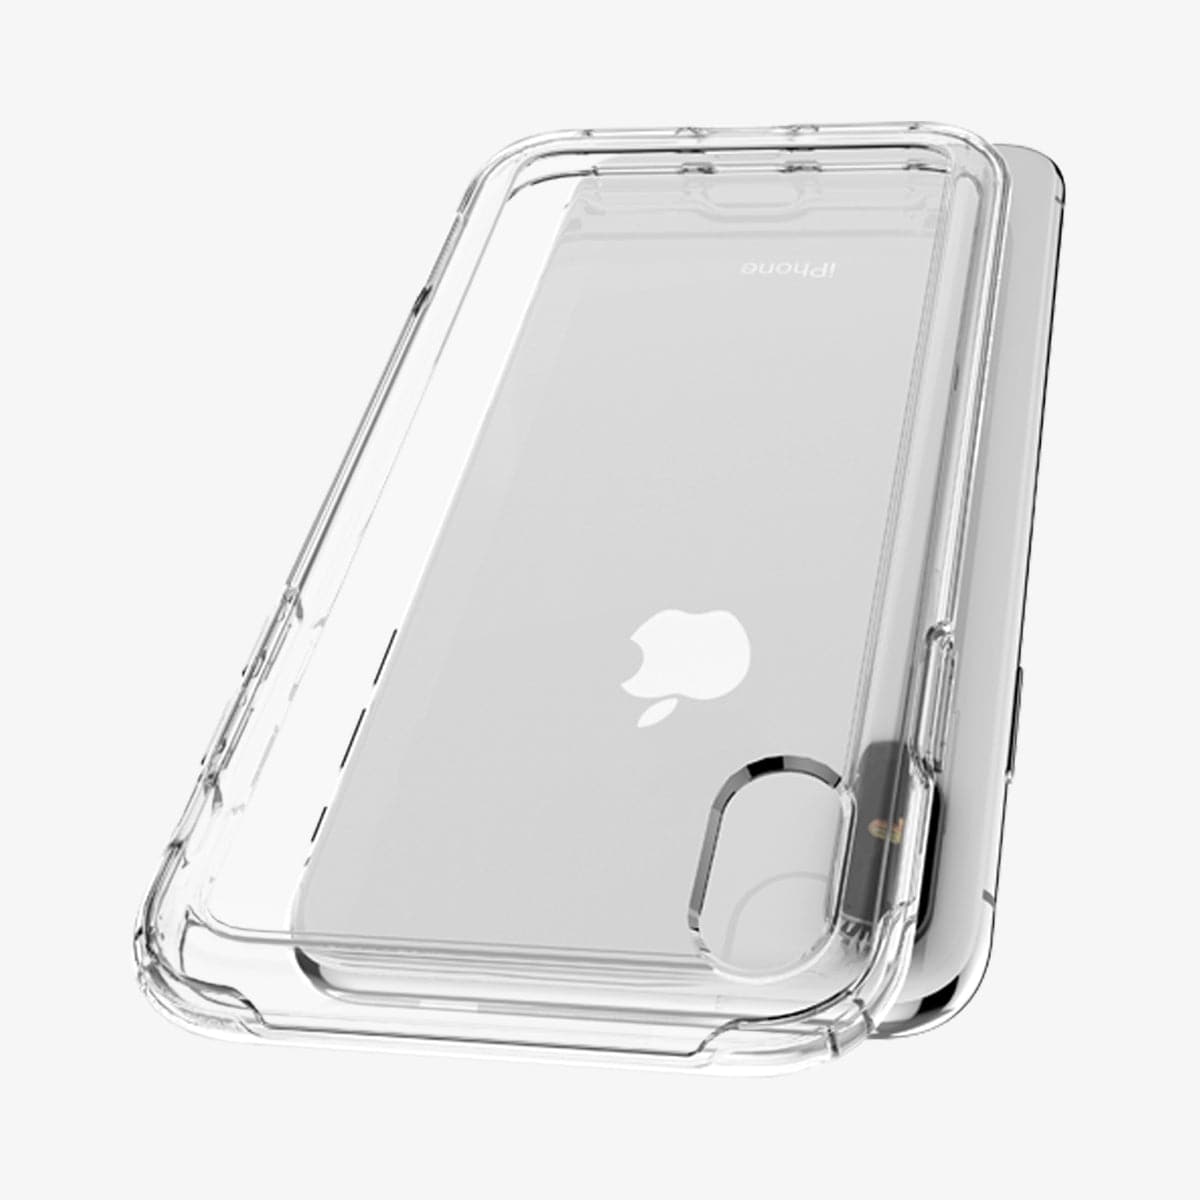 065CS24548 - iPhone XS Max Case Slim Armor Crystal in crystal clear showing the case hovering above the back of device